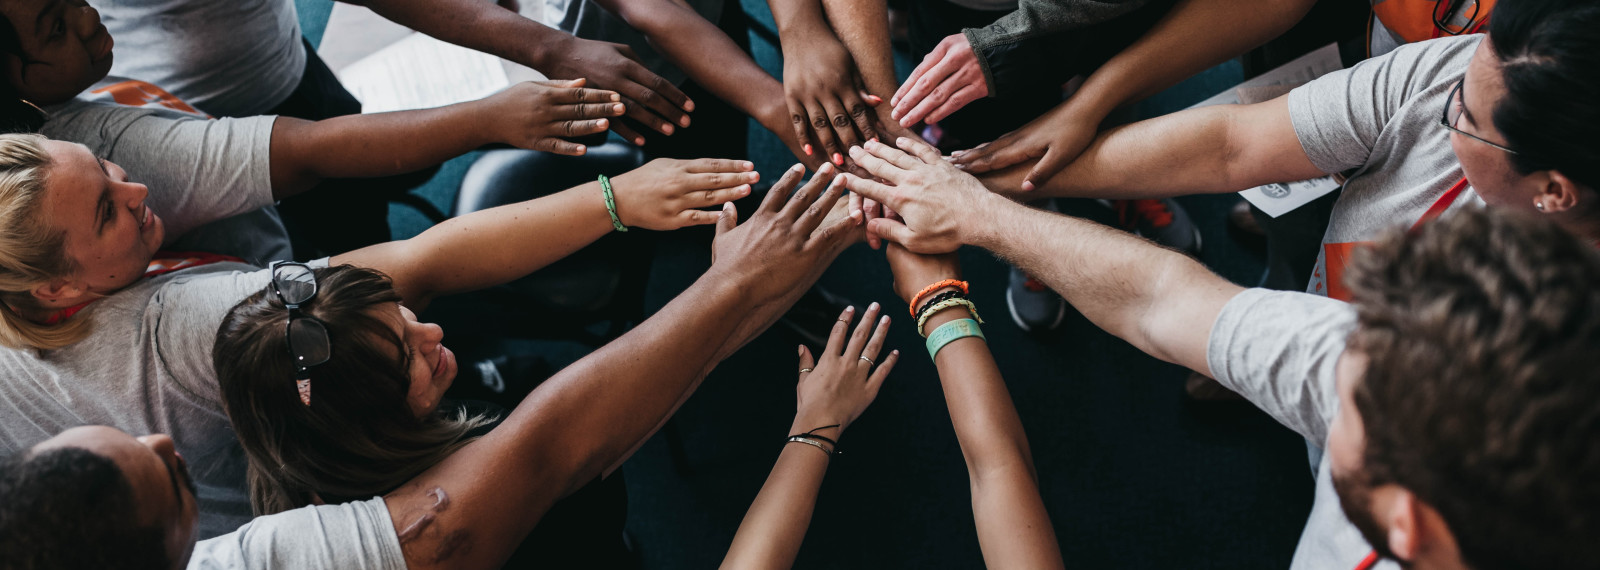 Image of a circle of people touching hands in a huddle